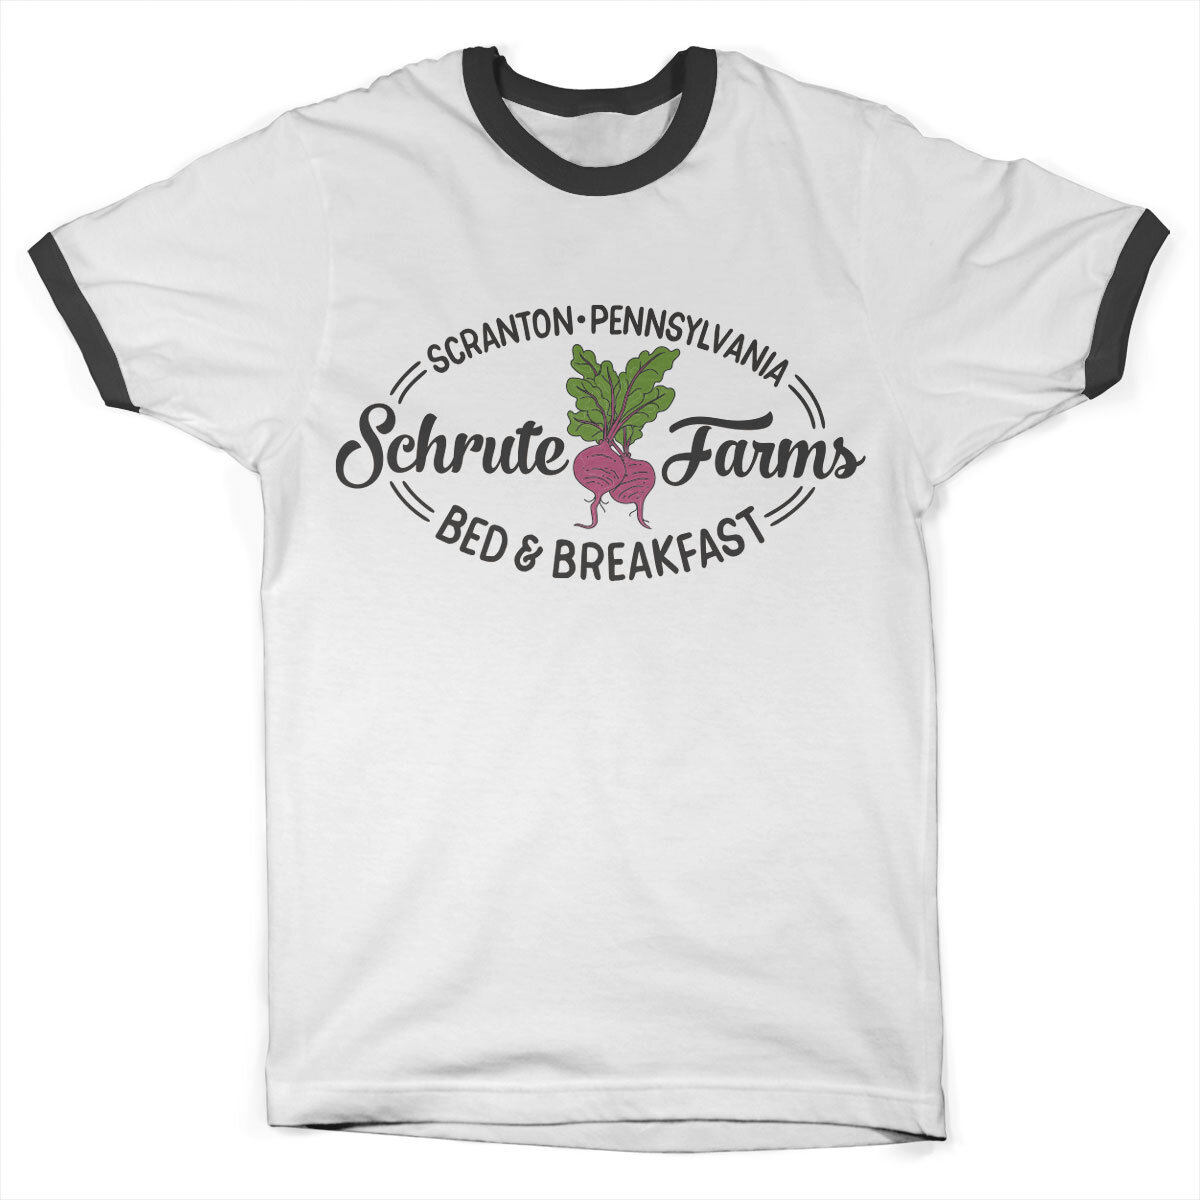 Schrute Farms - Bed & Breakfast Ringer Tee